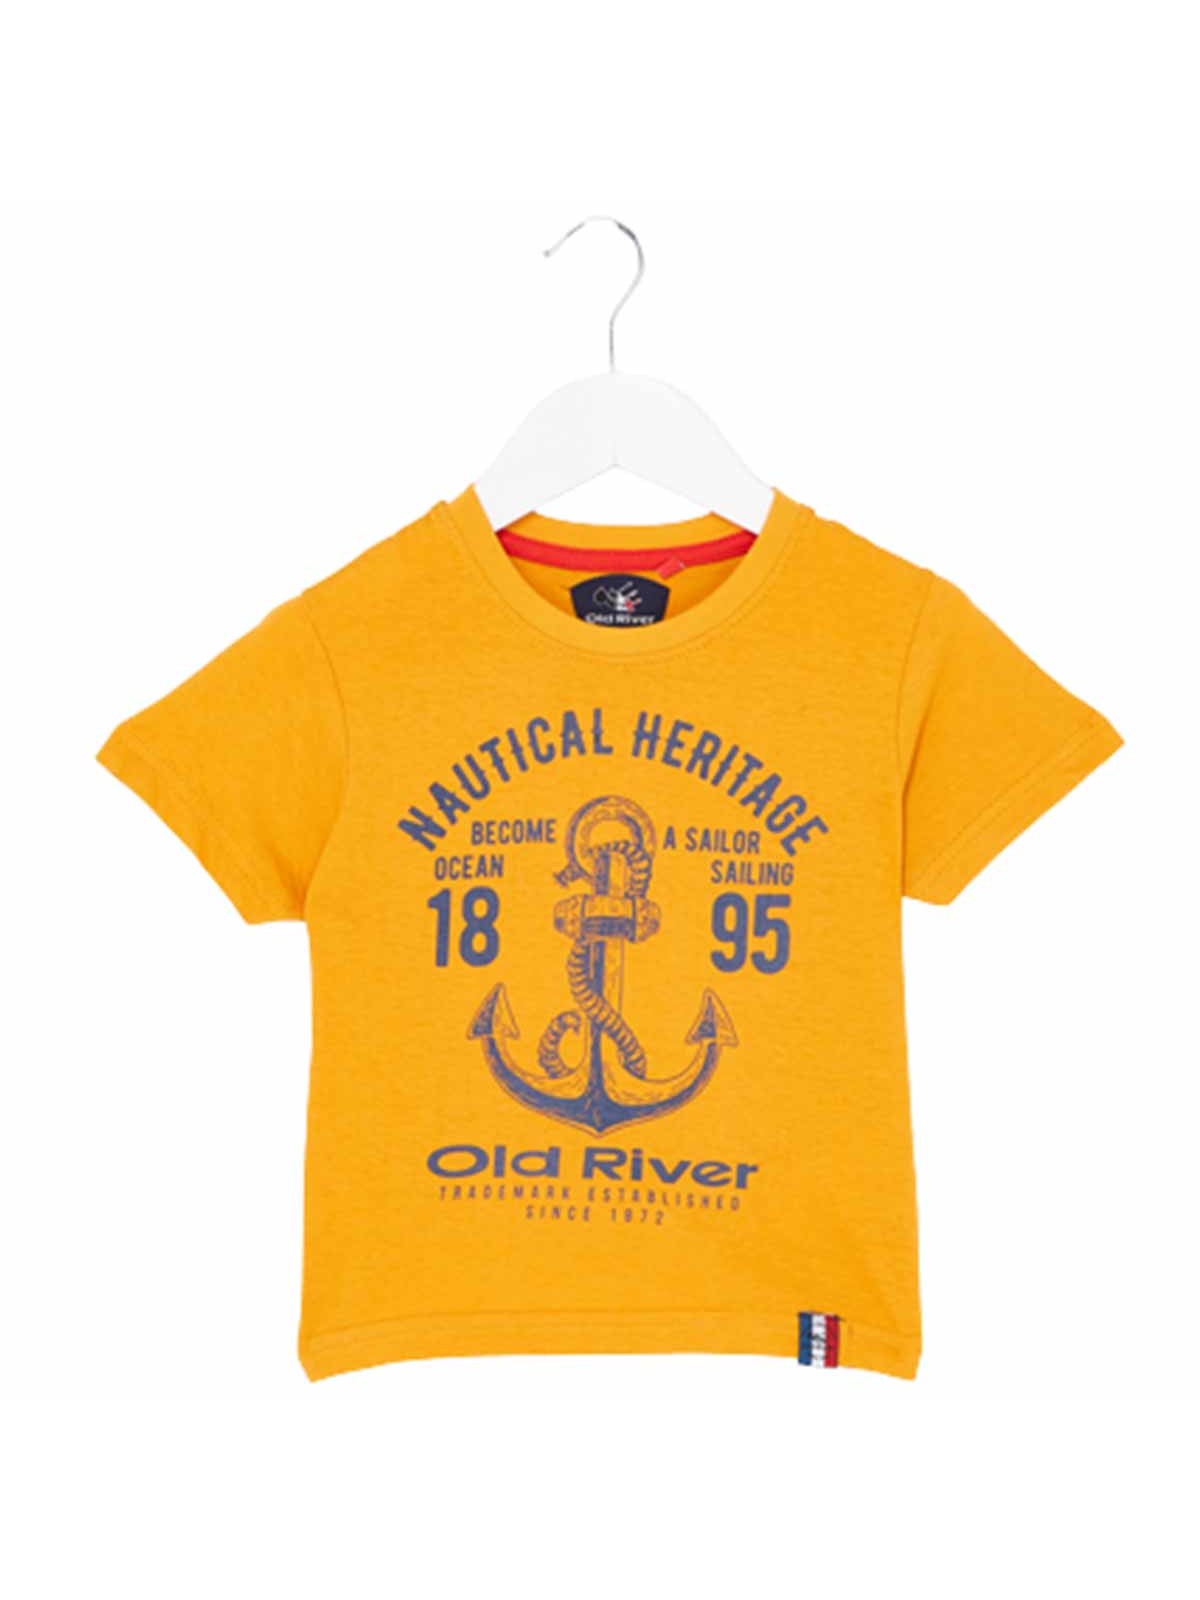 T-shirt Old River 